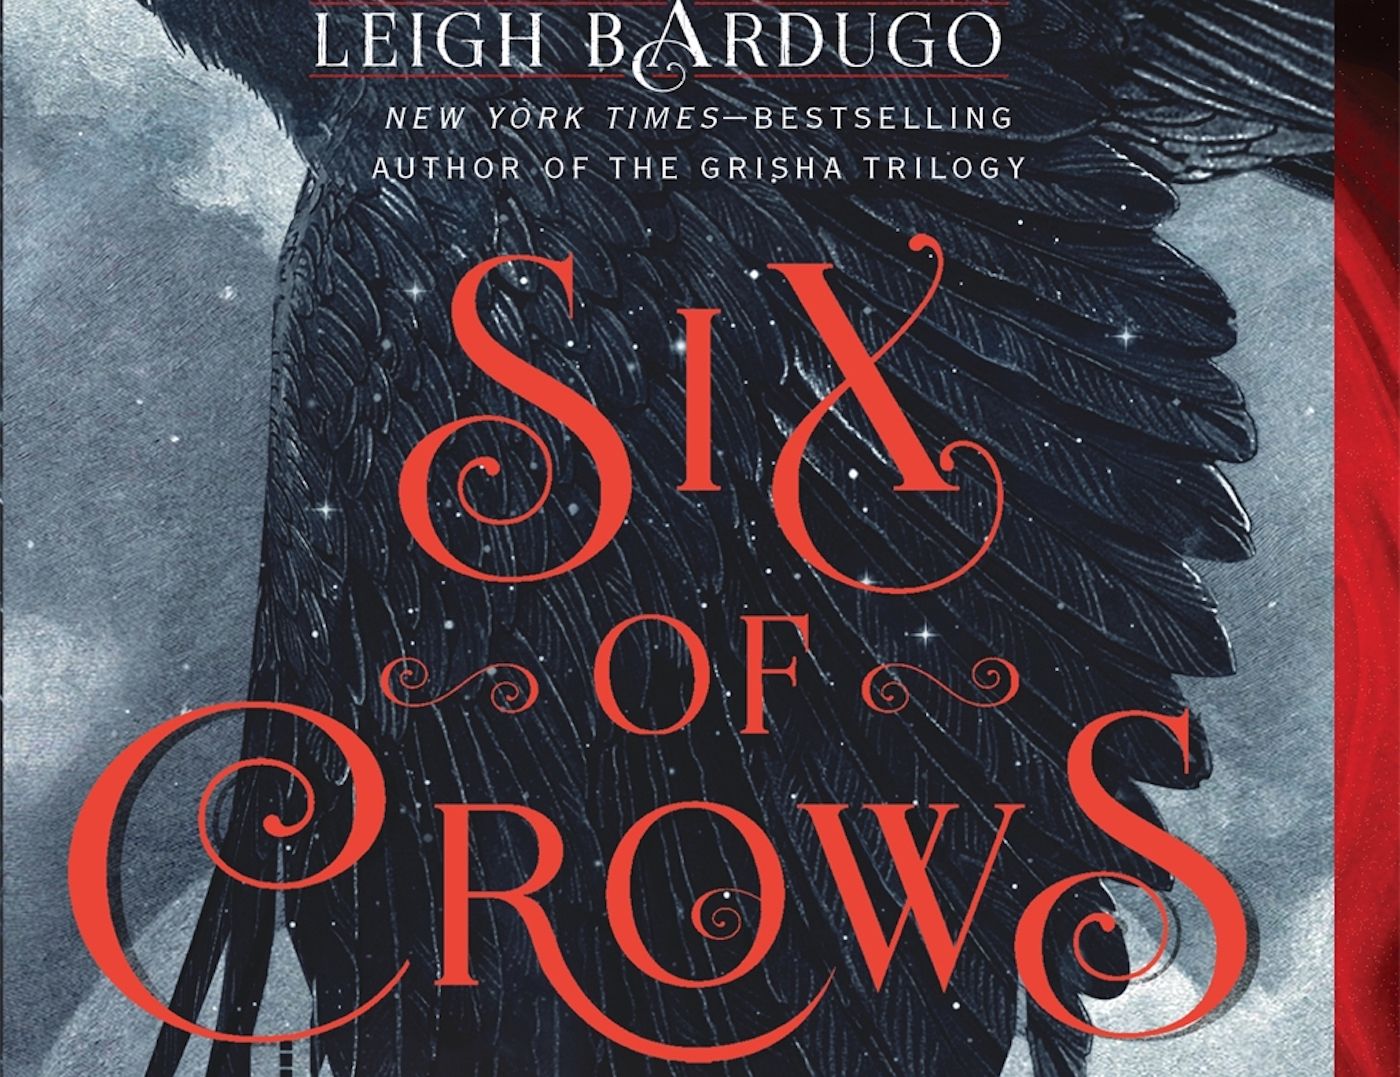 Six-of-crows-book-cover